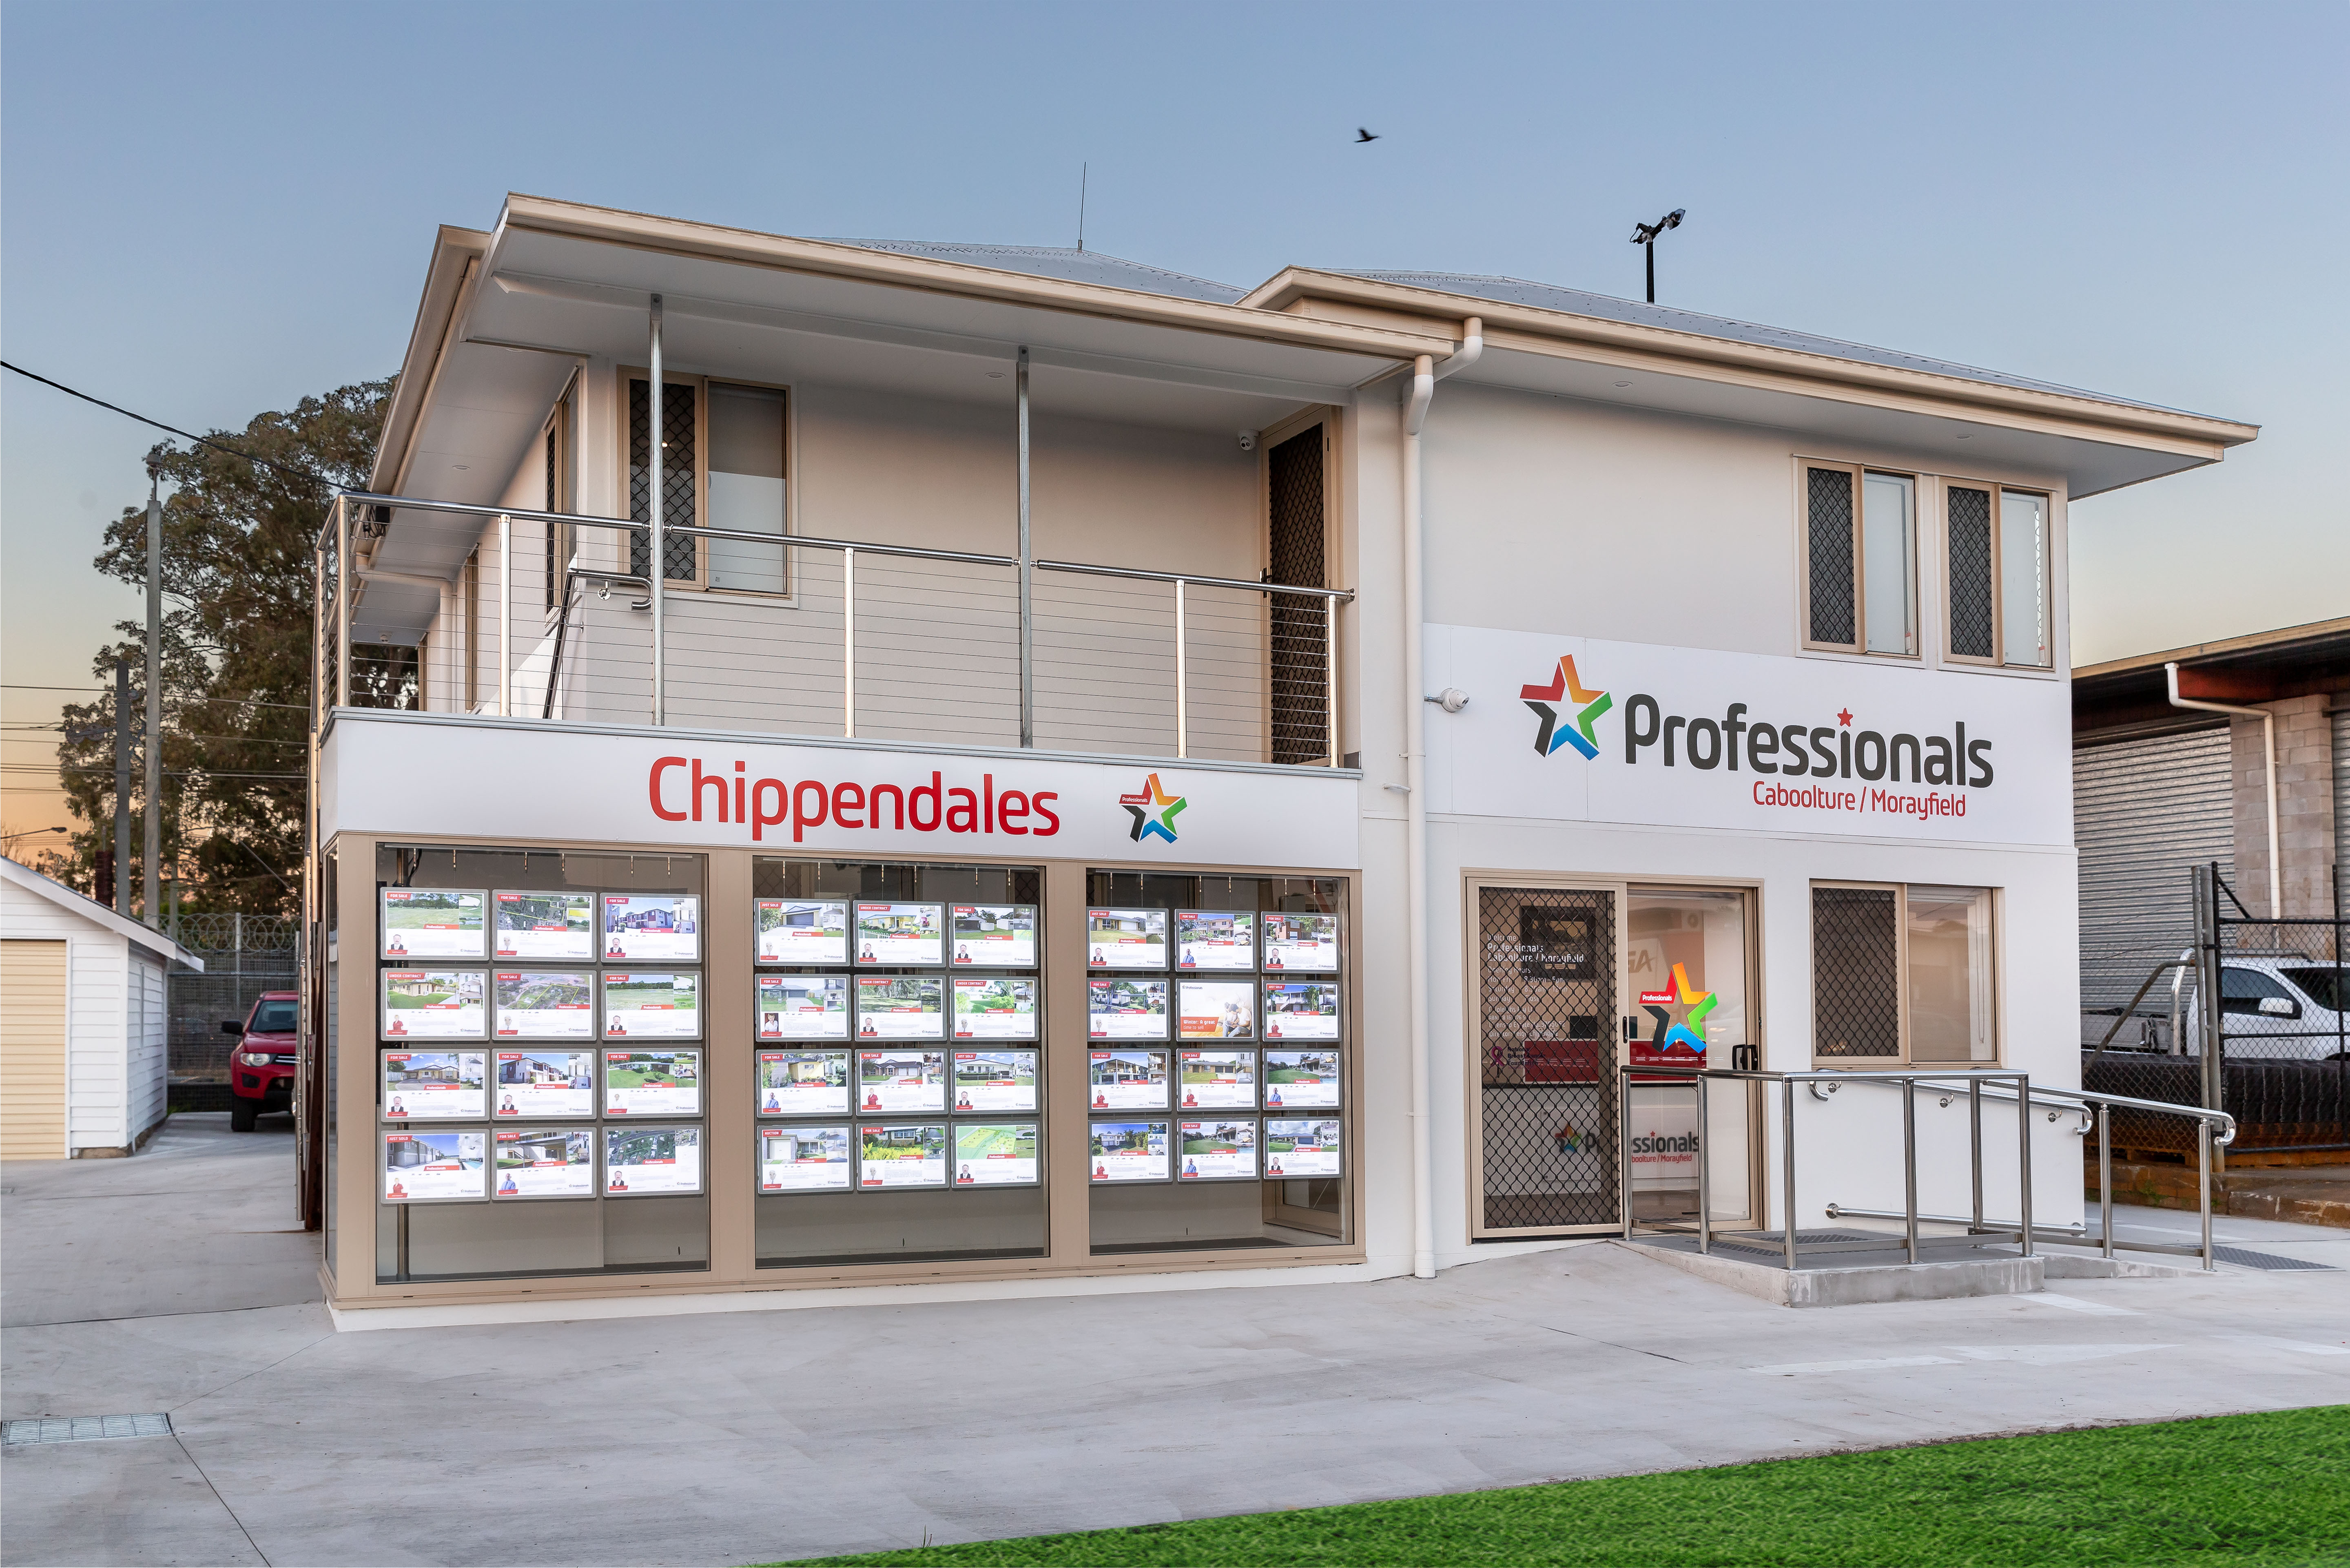 Newsletter Professionals Caboolture/Morayfield